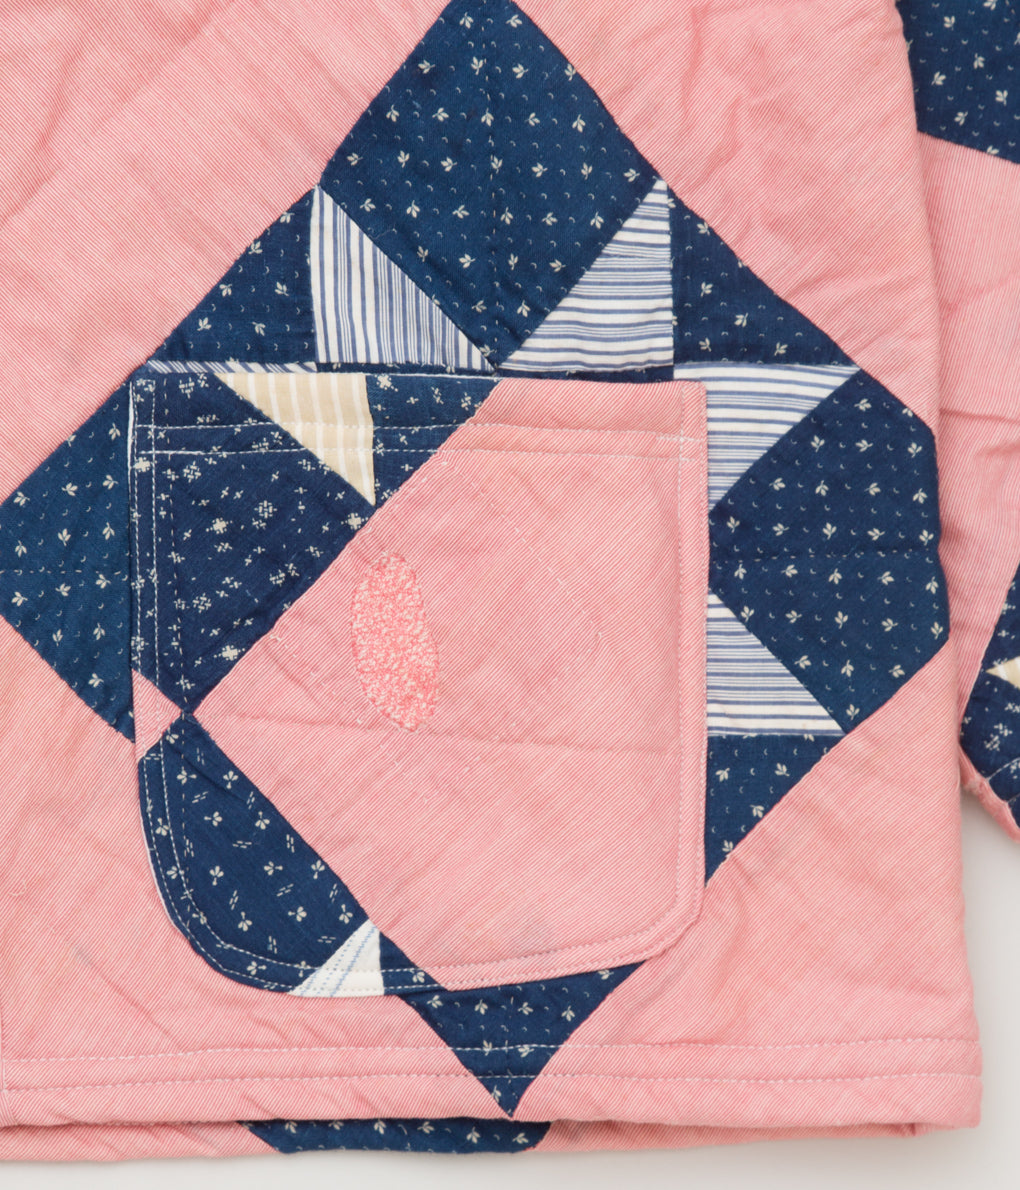 FAREWELL FRANCES "CLAUDE QUILTED COAT"(PINK MULTI)